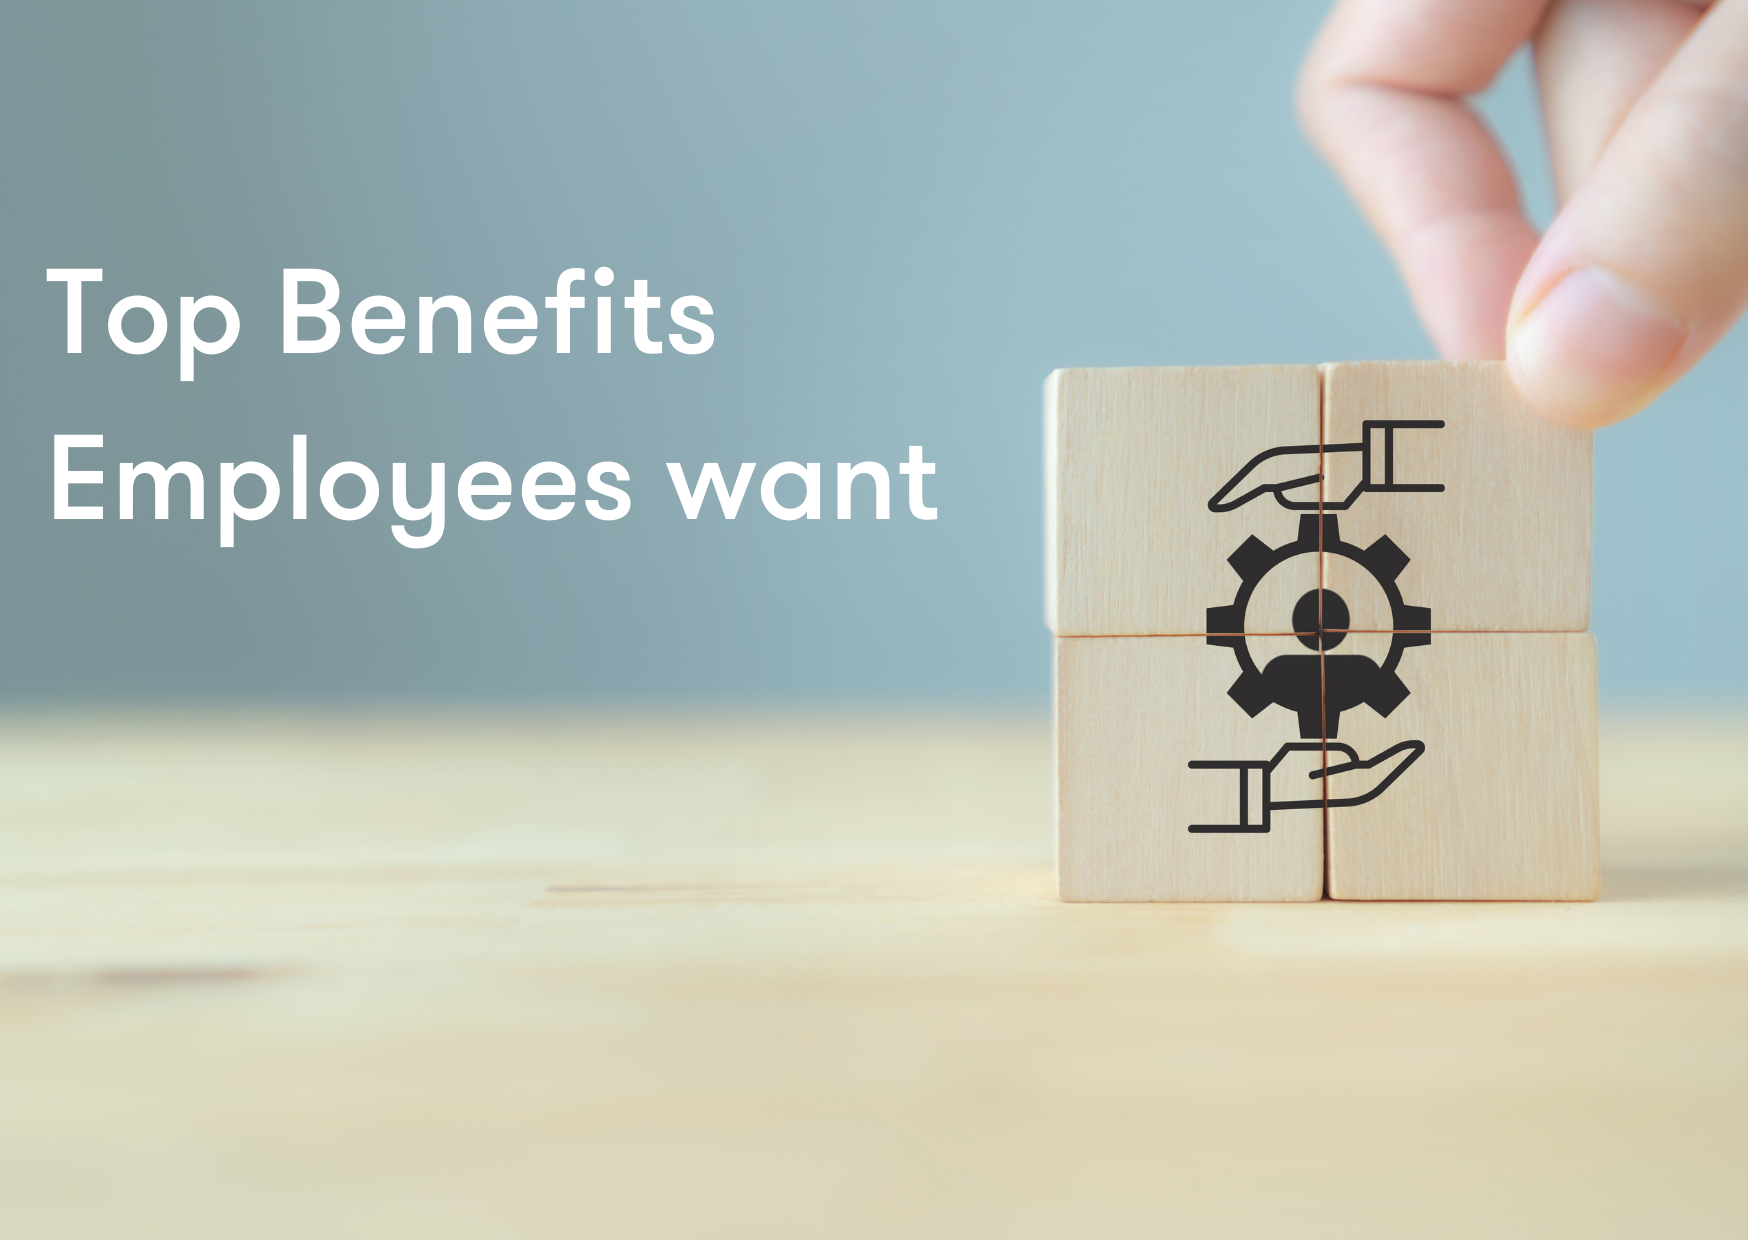 Top Benefits Employees want